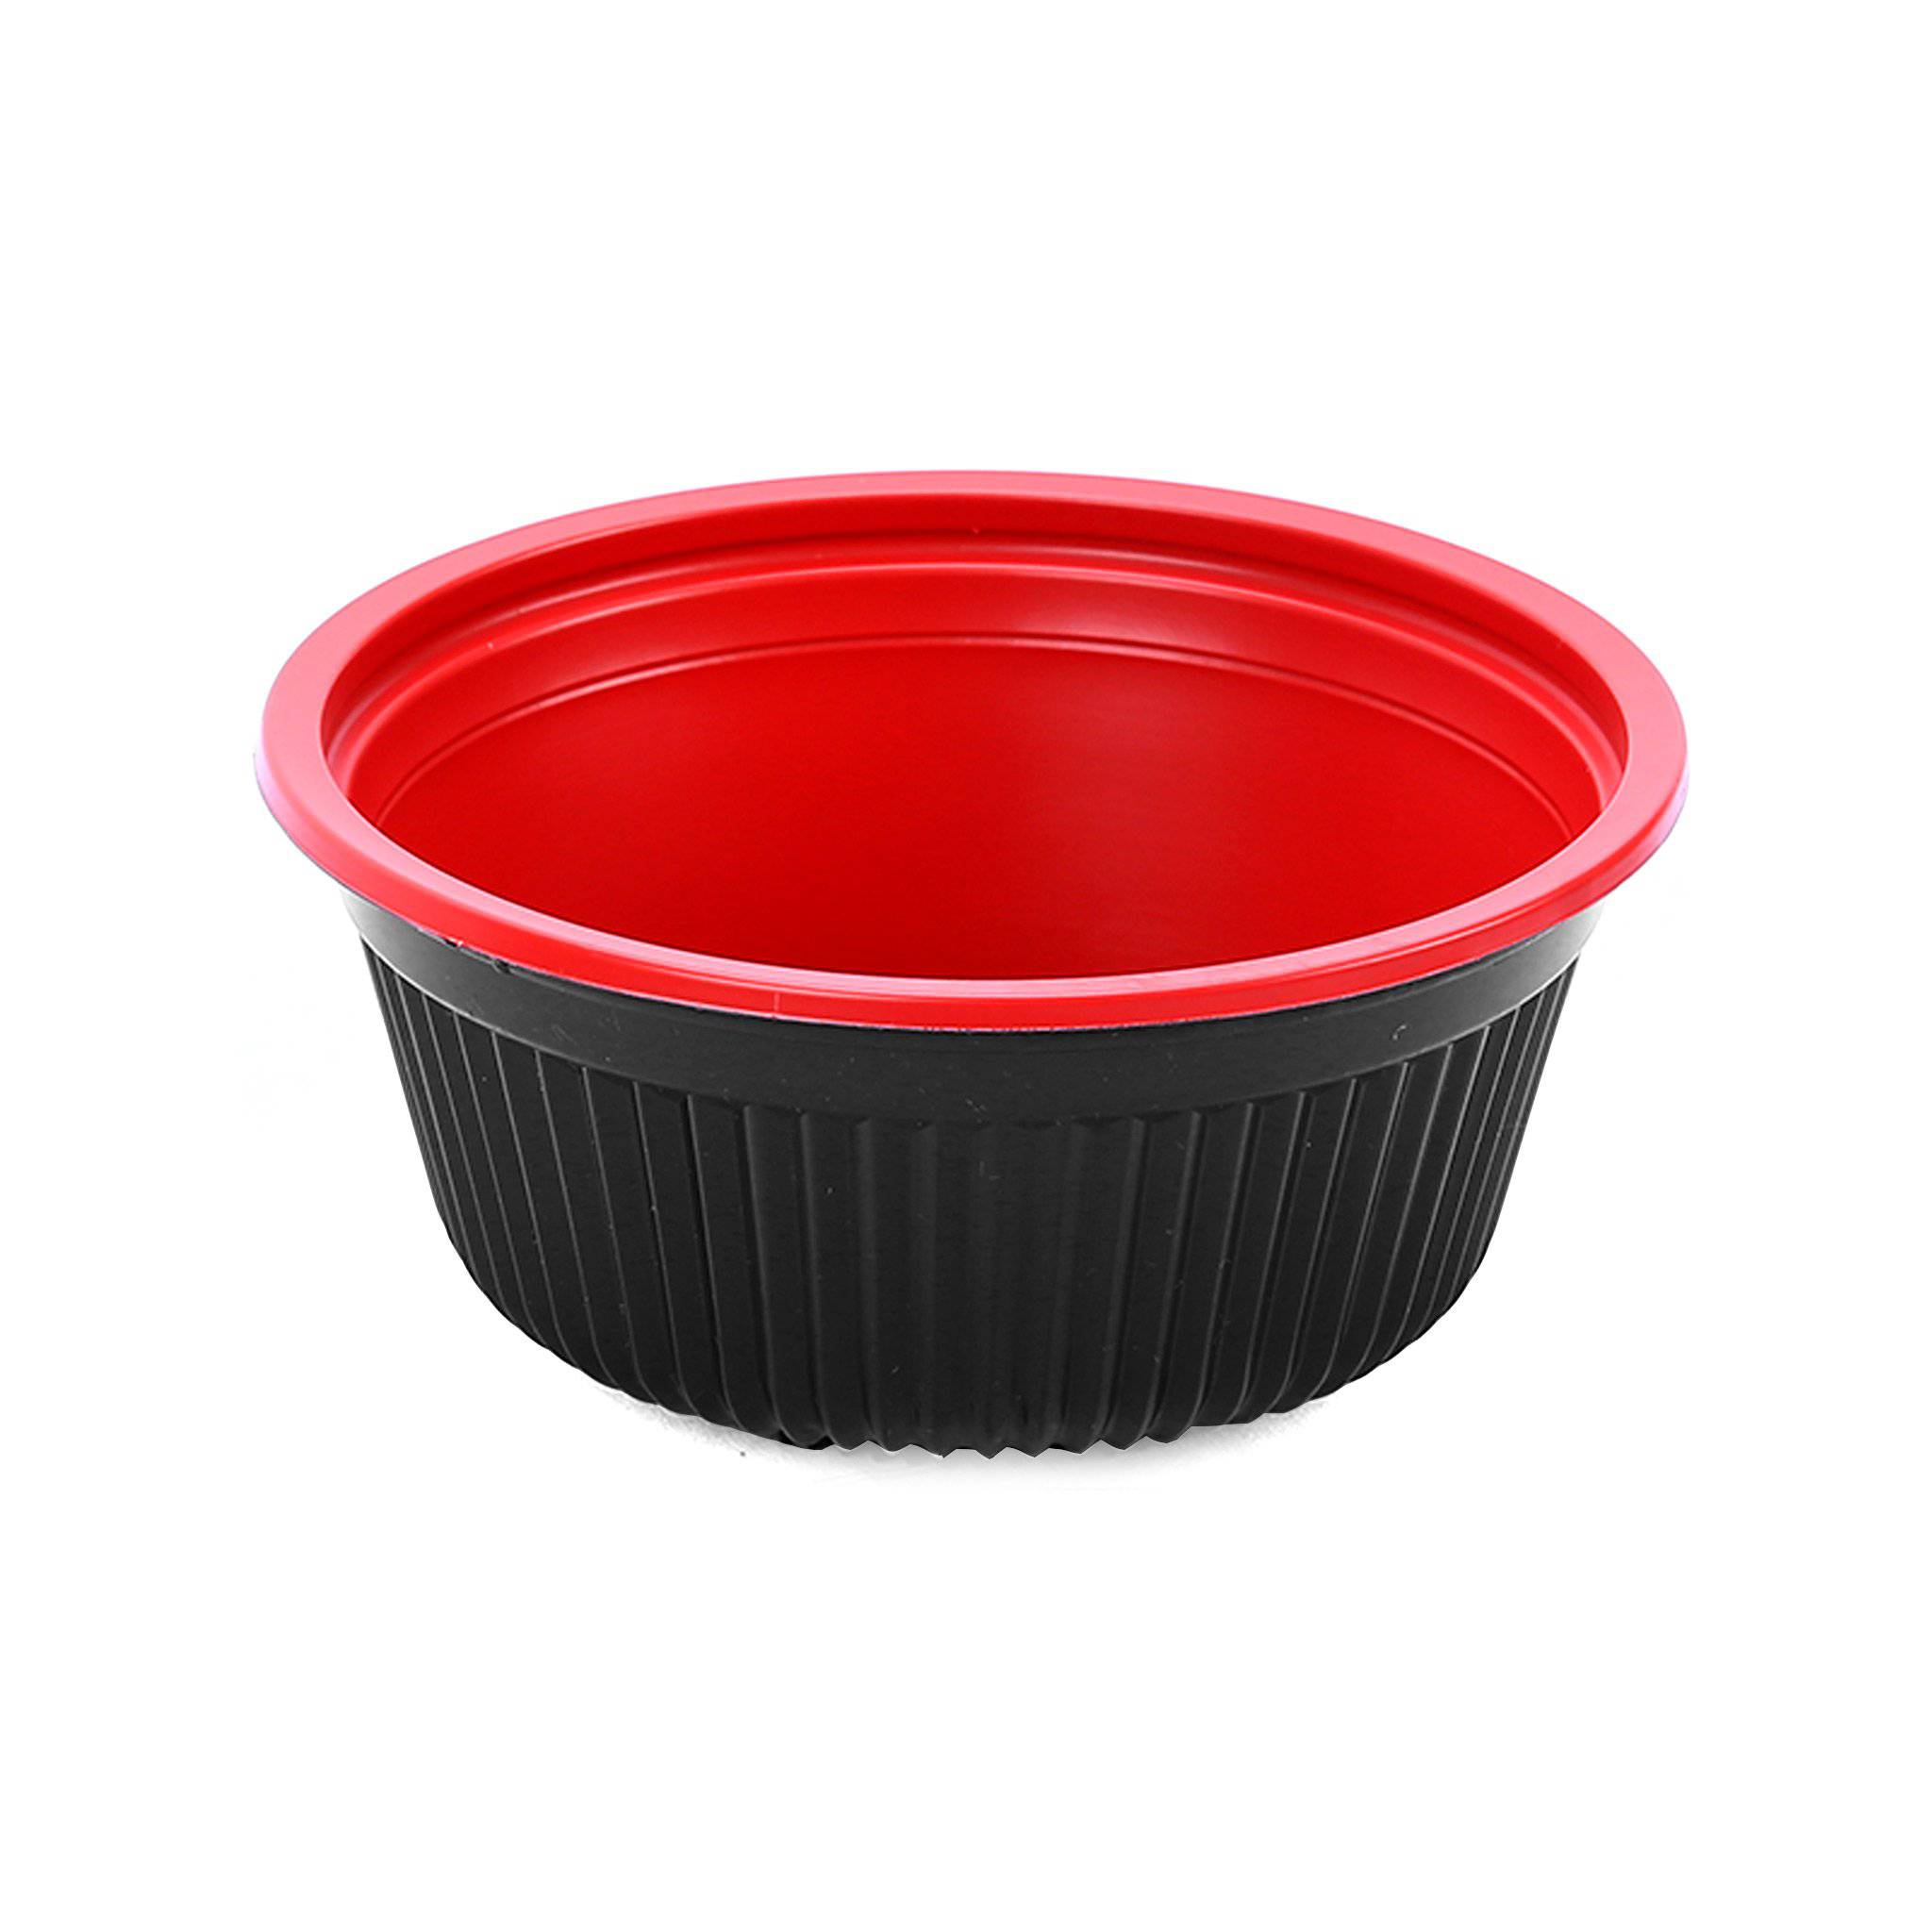 Hotpack | Red & Black Soup Bowl 700 cc with Lids | 200 Pieces - Hotpack Global